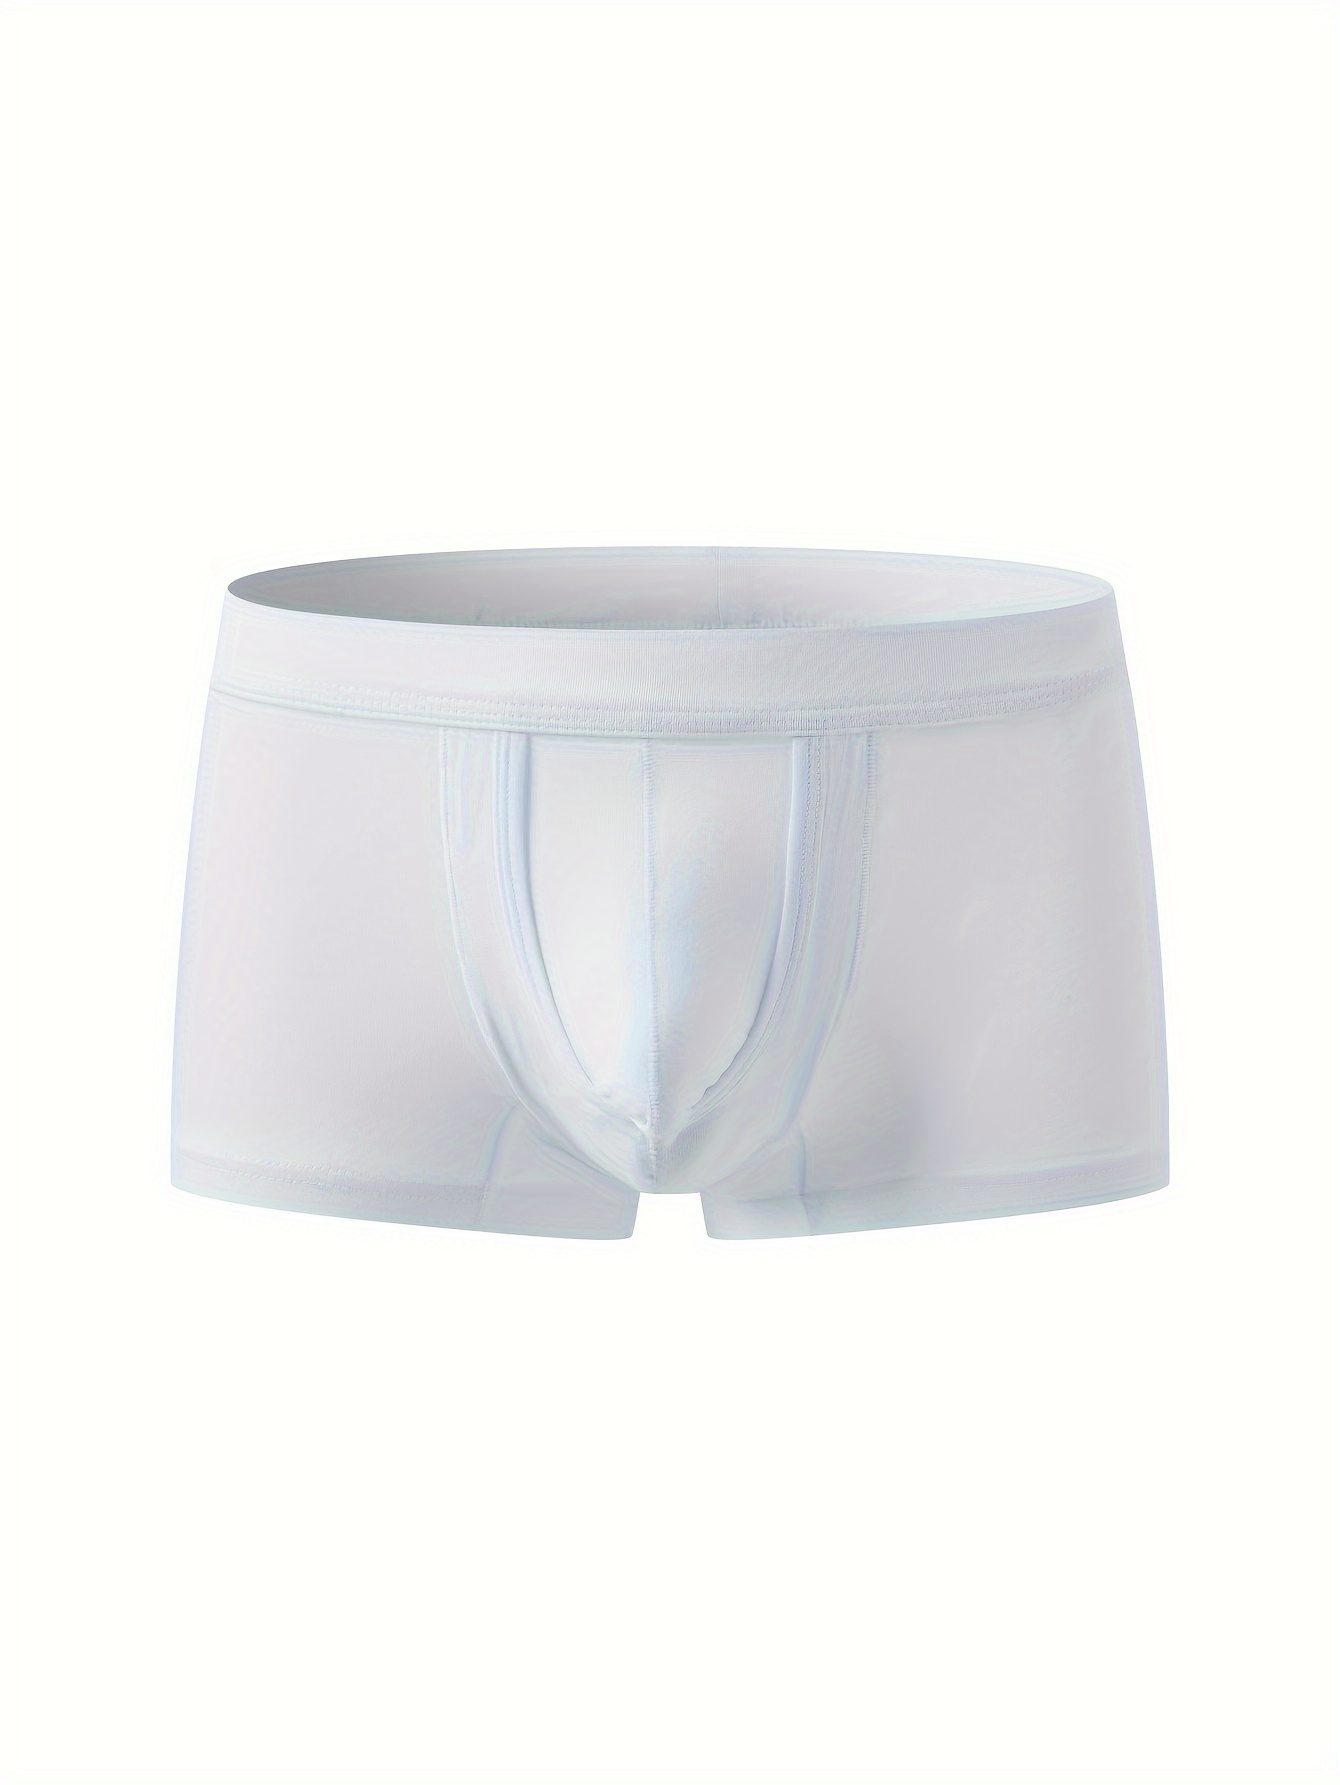 Anza Boxer Brief with Wholester – Sports Basement